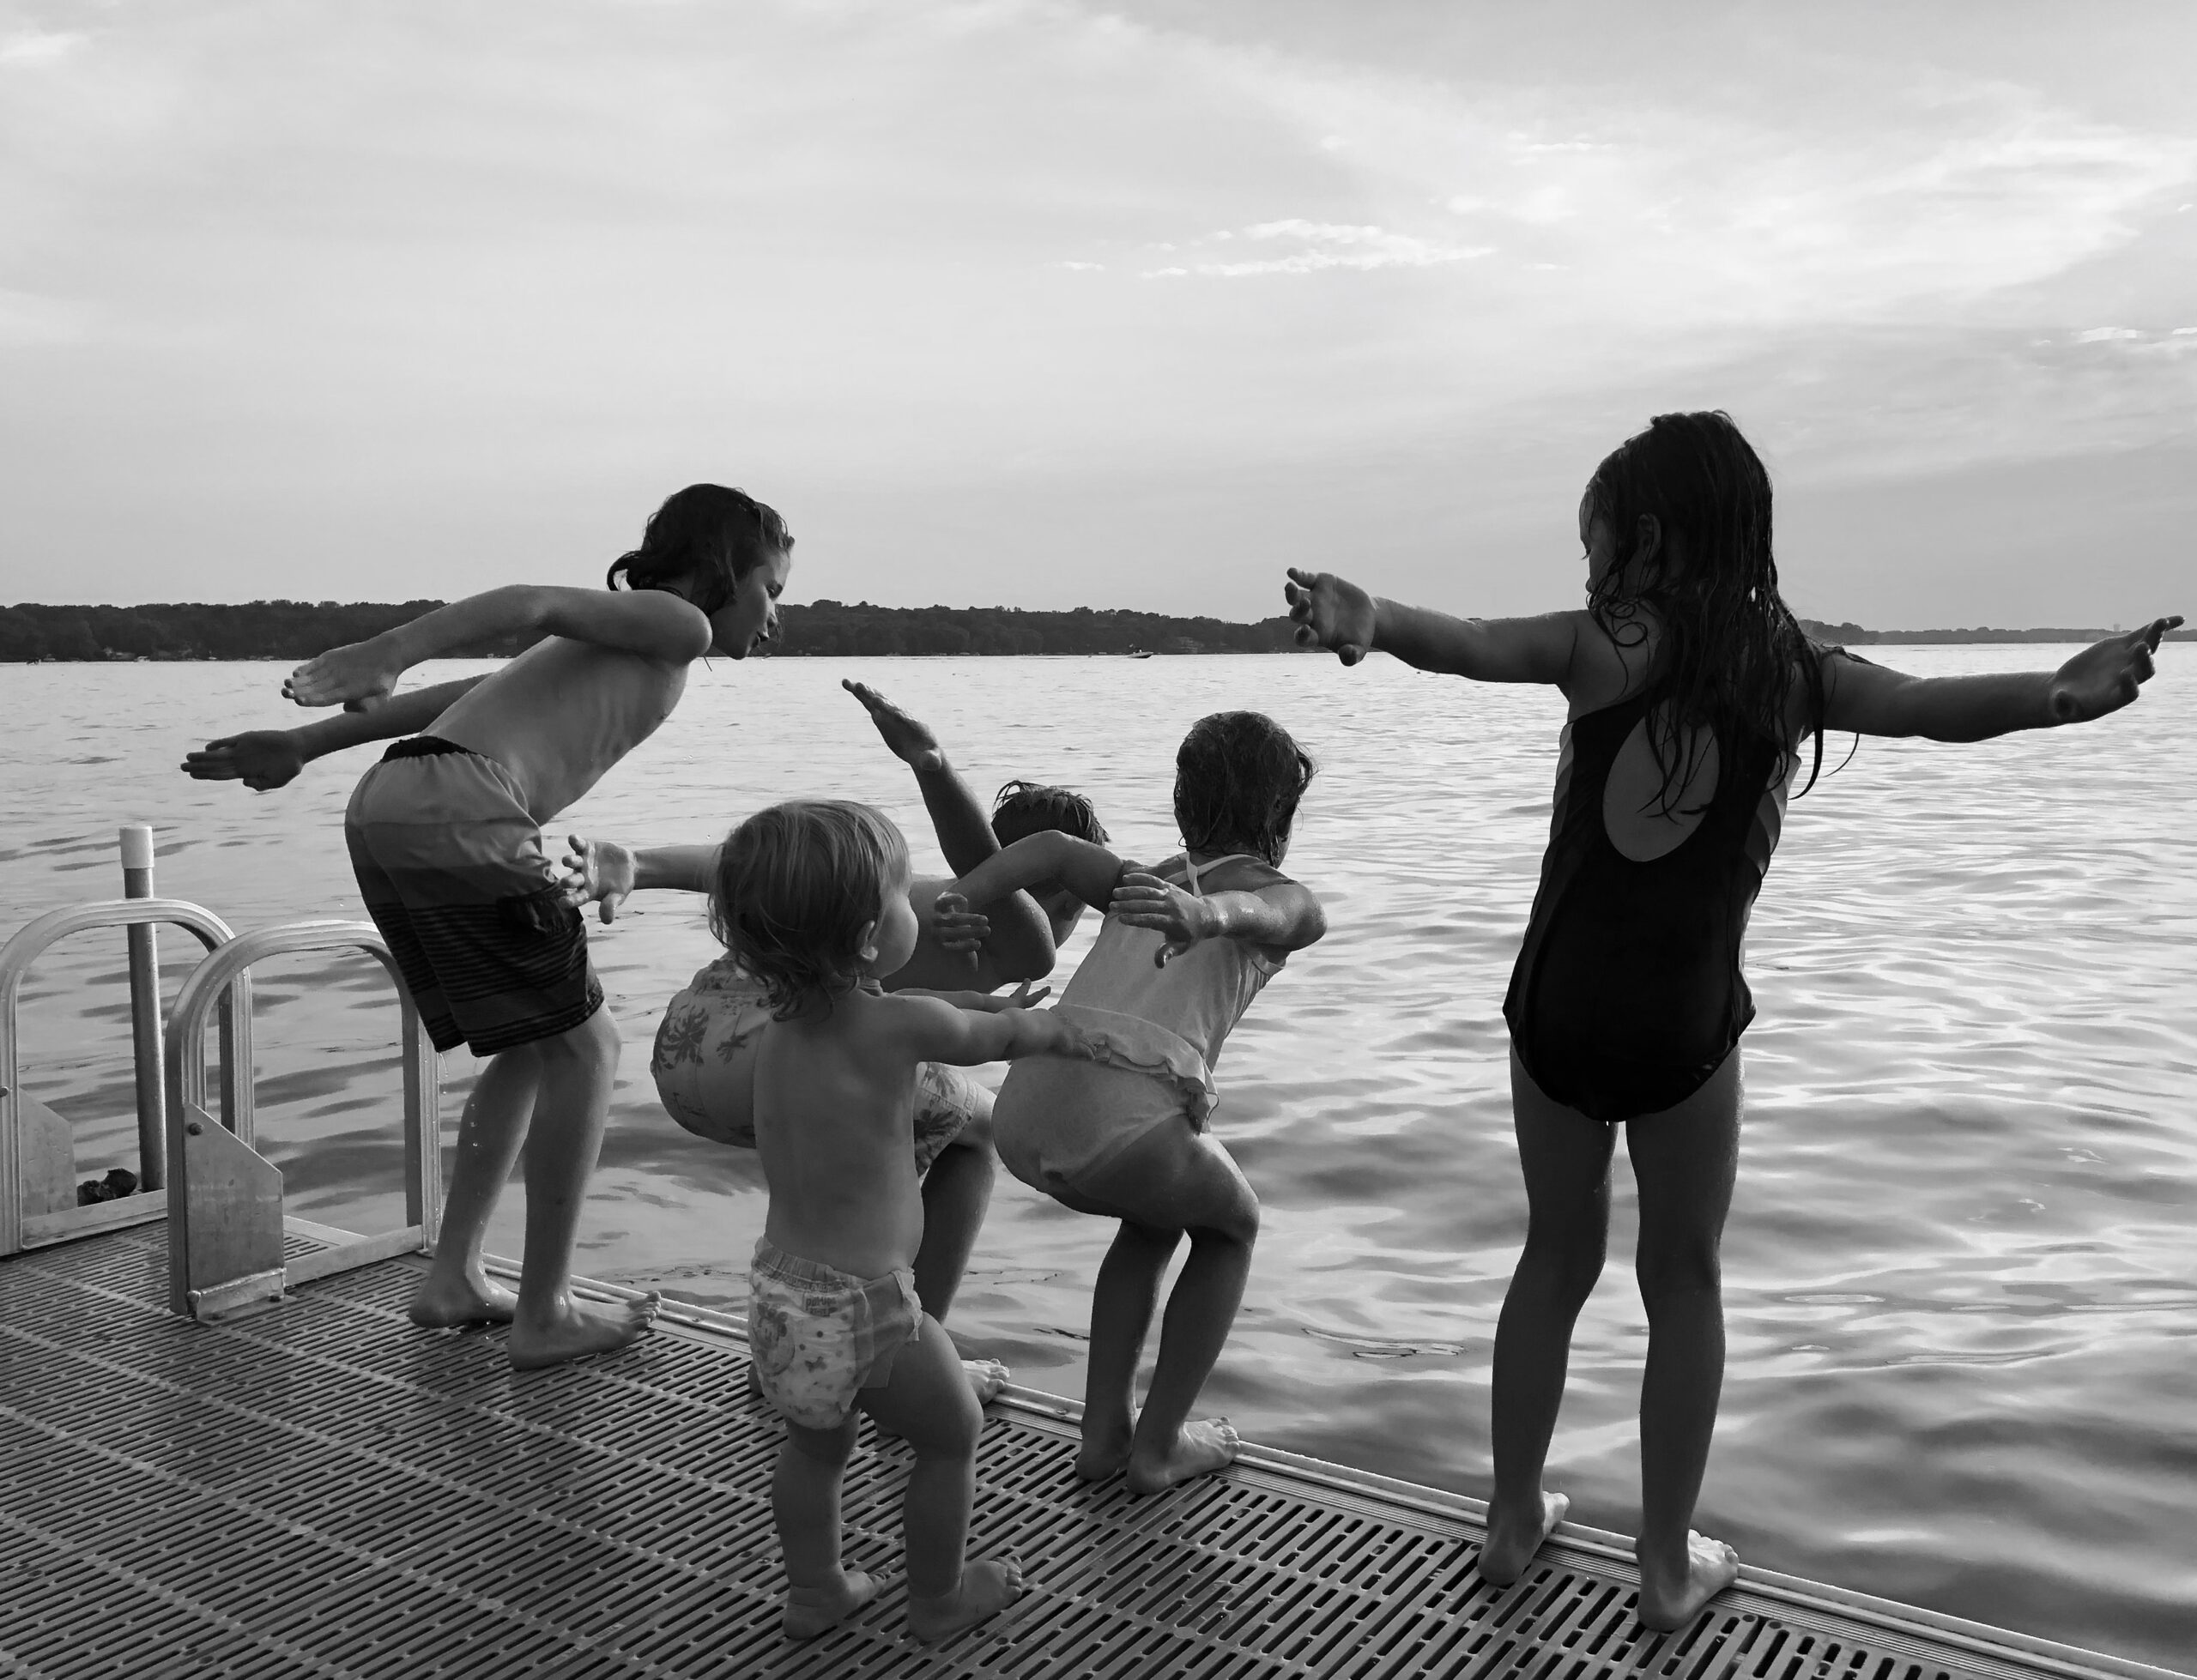 Little Dynamo: Watch out, world! This fearless 1-year-old takes charge, sending her older sibs and cousins on a splashy adventure at White Bear Lake! by Jane Schneeweis